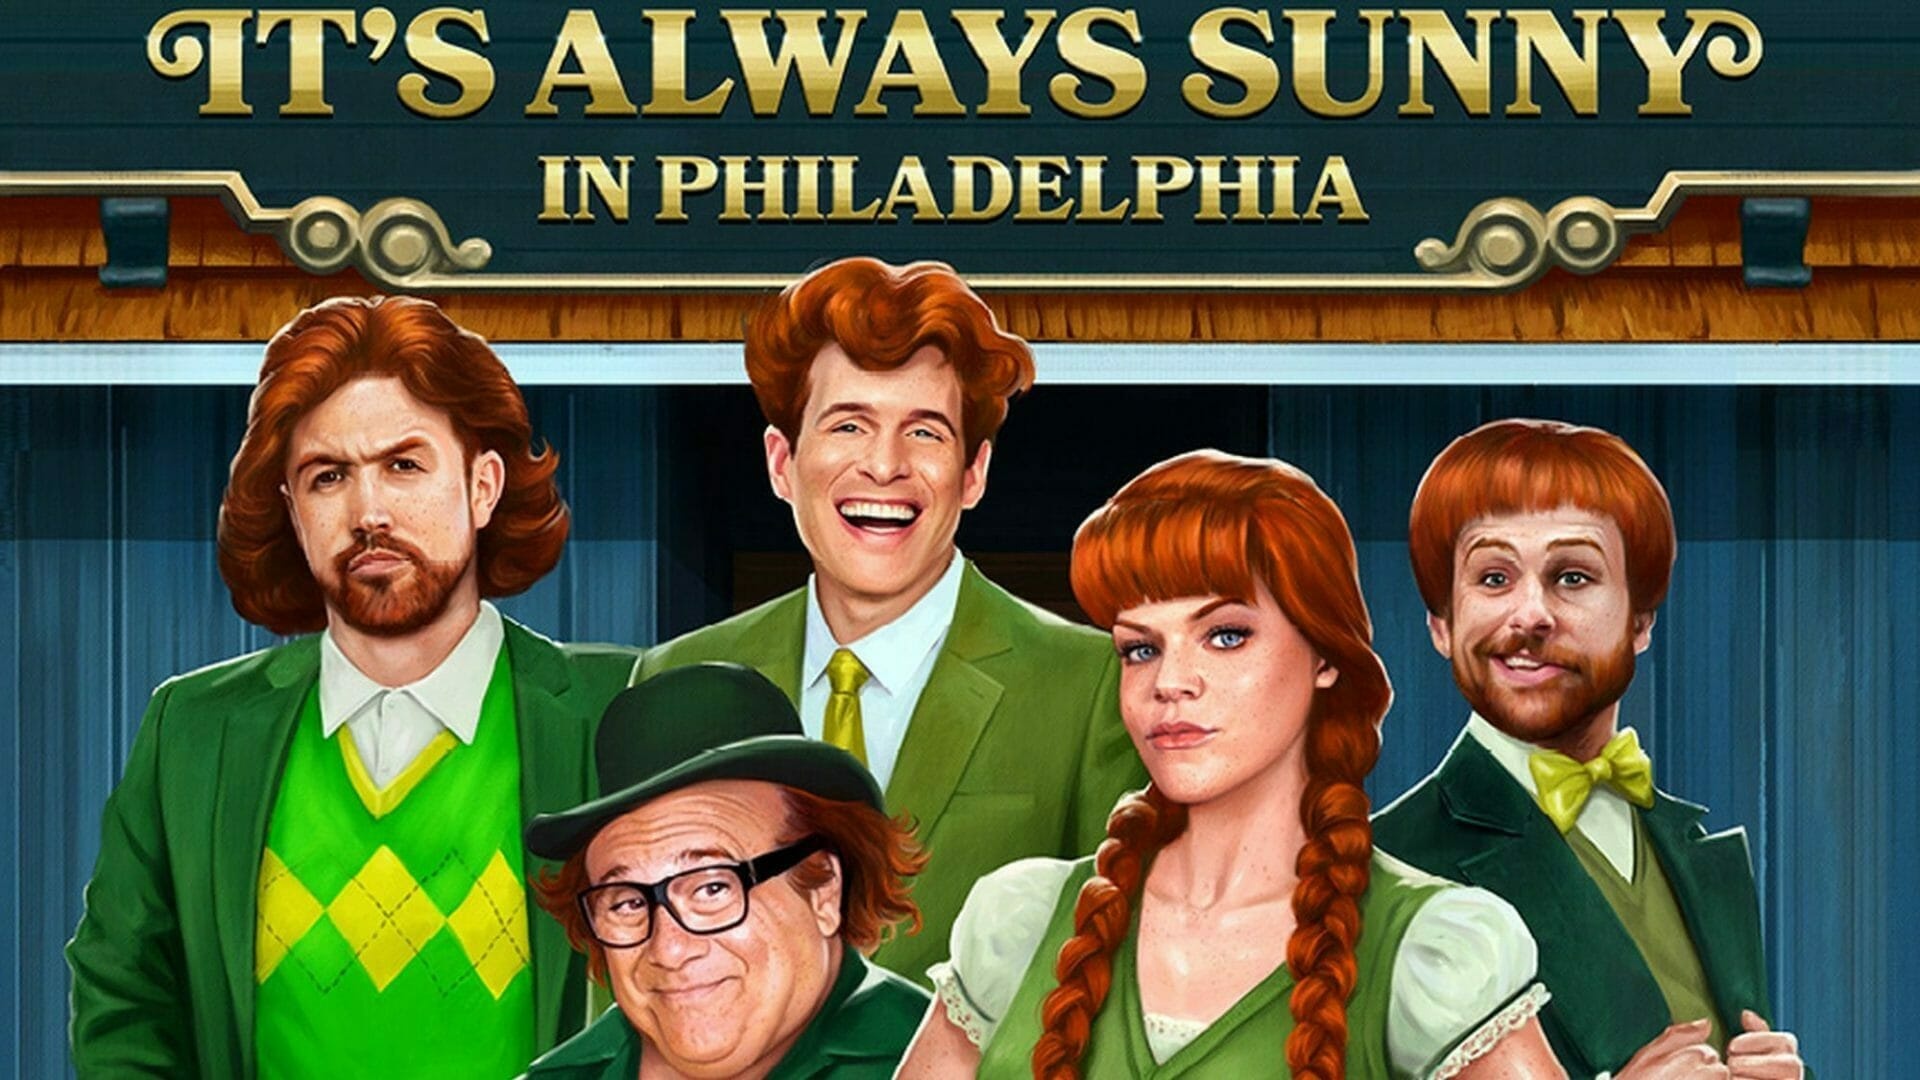 It's Always Sunny in Philadelphia (TV Series): The fifteenth season, Next day availability on FX on Hulu and FXNOW, Eight episodes. 1920x1080 Full HD Background.